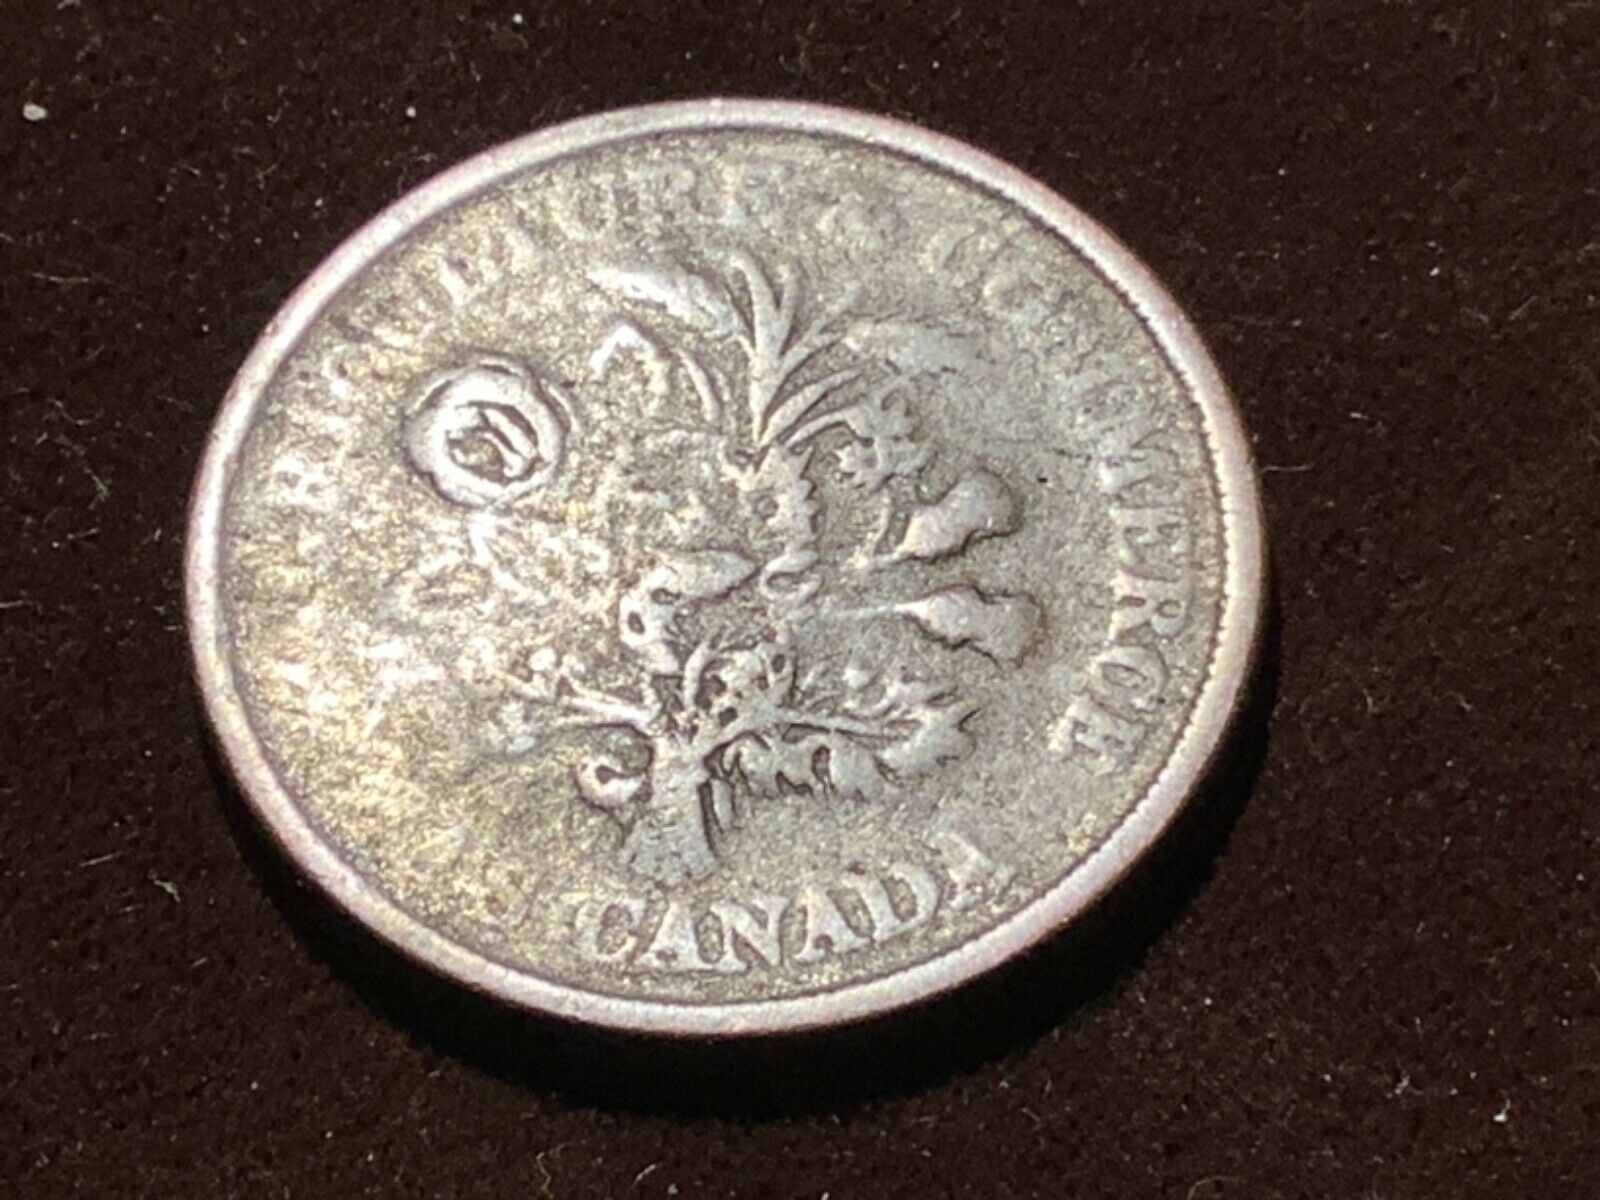 #1 1837 Lower Canada Montreal Agriculture & Commerce Token Un Sou.